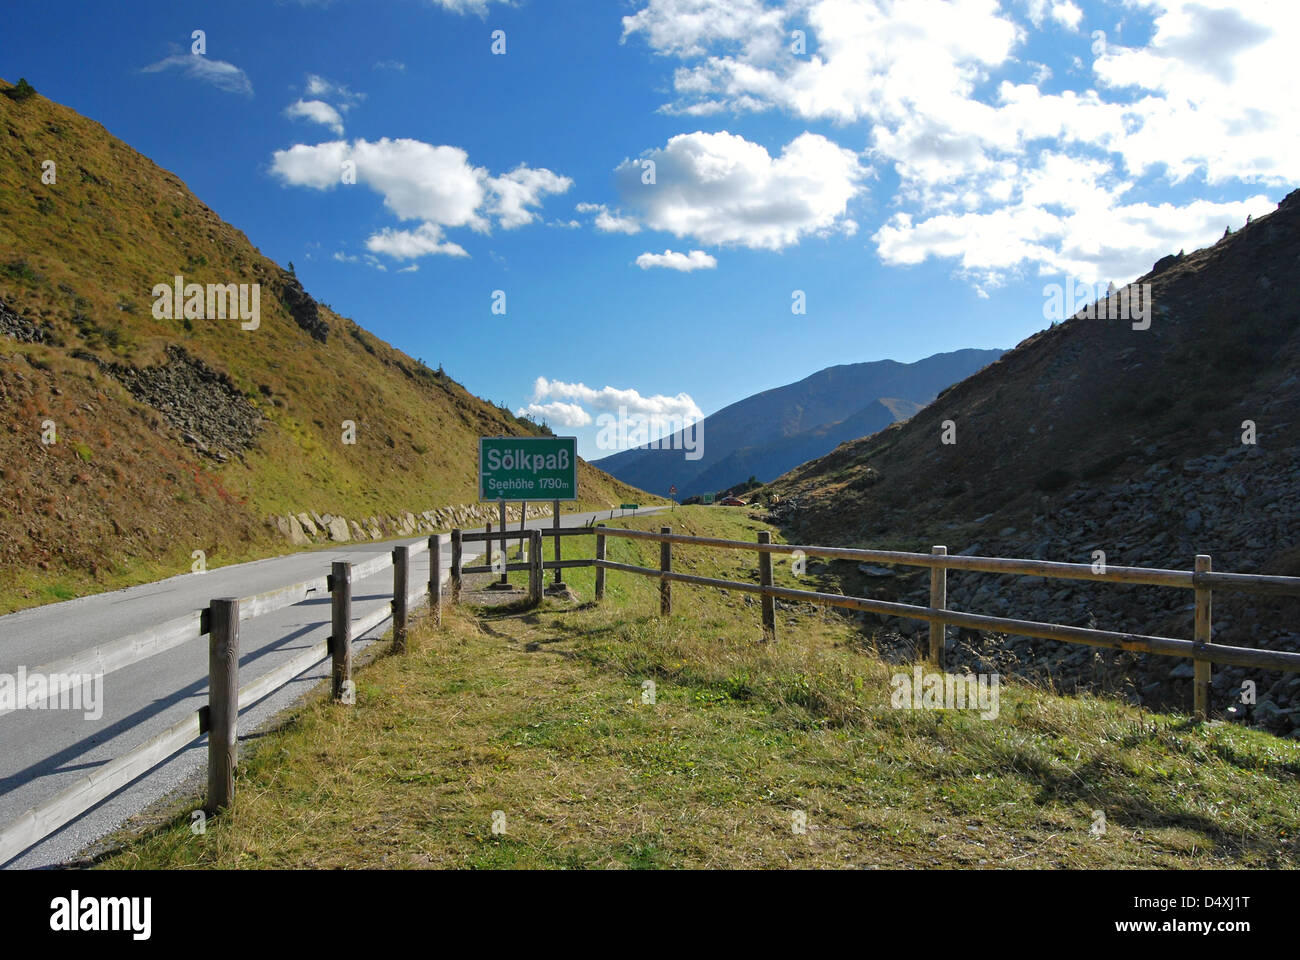 Solkpass mountain pass with road, peaks, meadow and blue sky with clouds in Niedere (Lowerú Tauern mountains in Austria Stock Photo